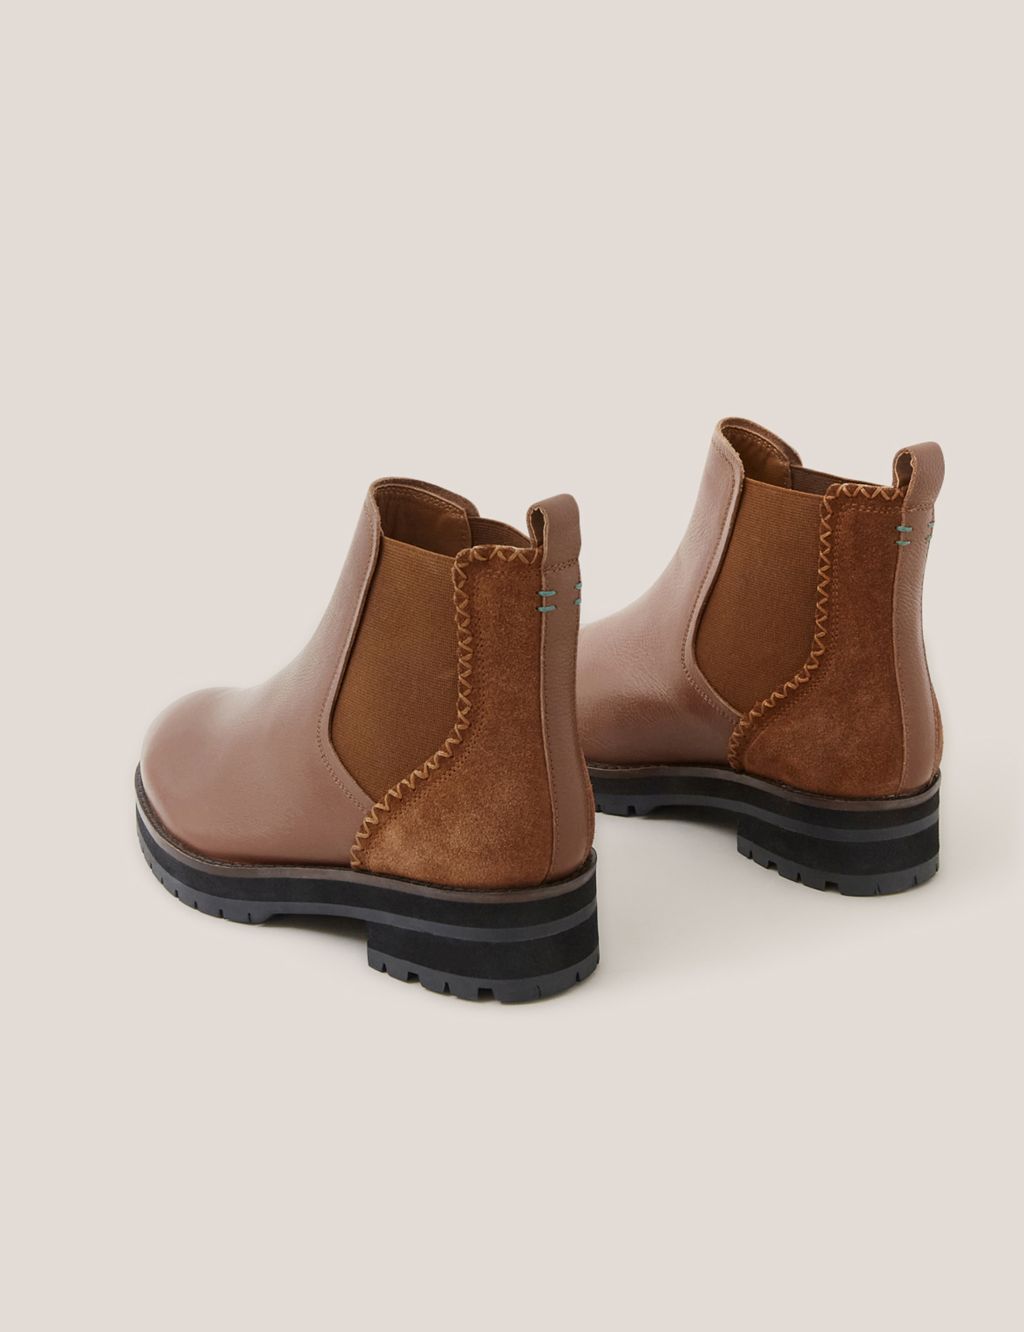 Wide Fit Leather Chelsea Boots image 3